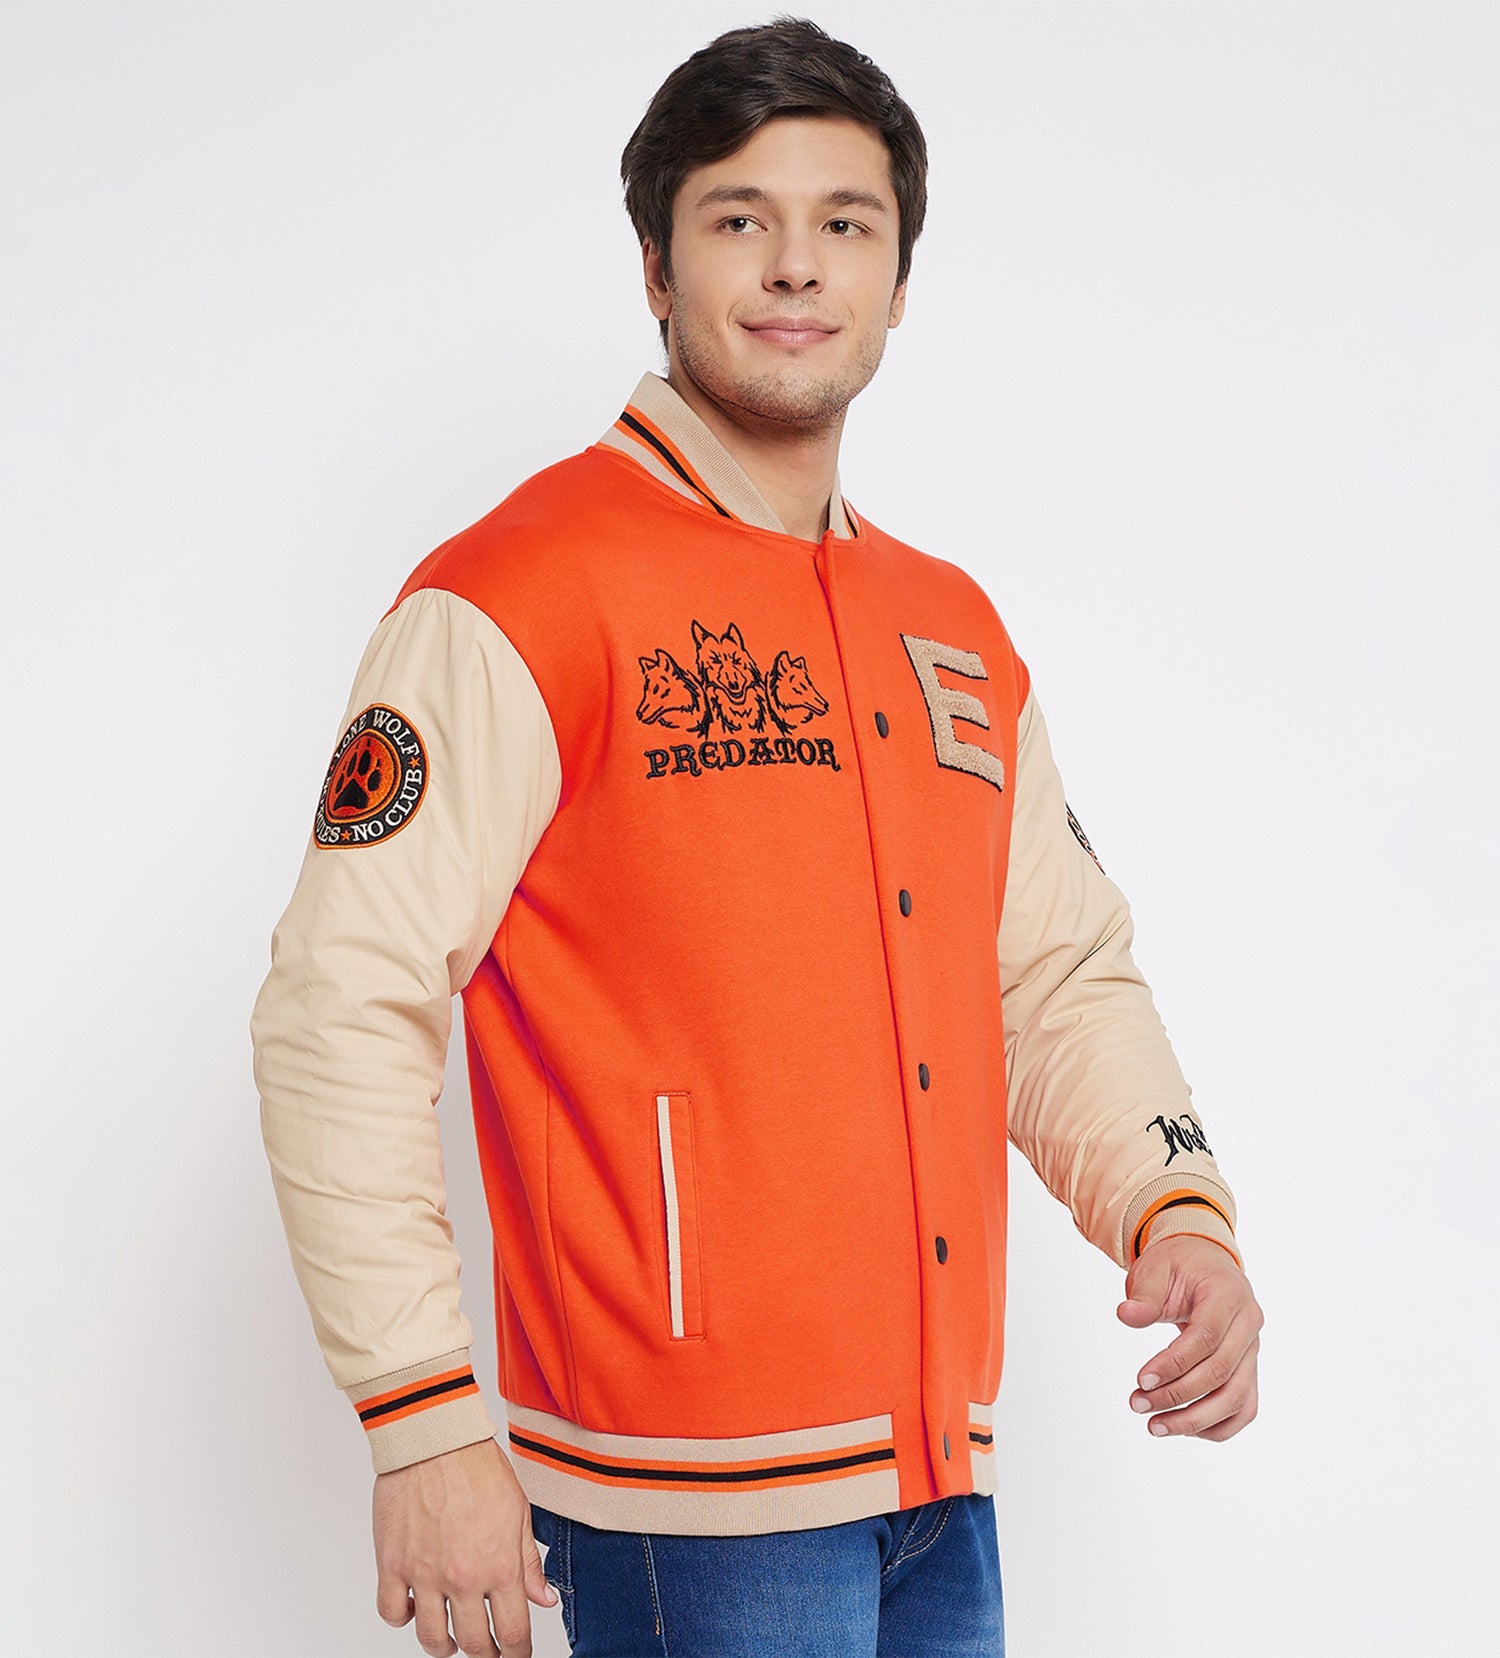 Loose fit Orange varsity jacket with detailed patches